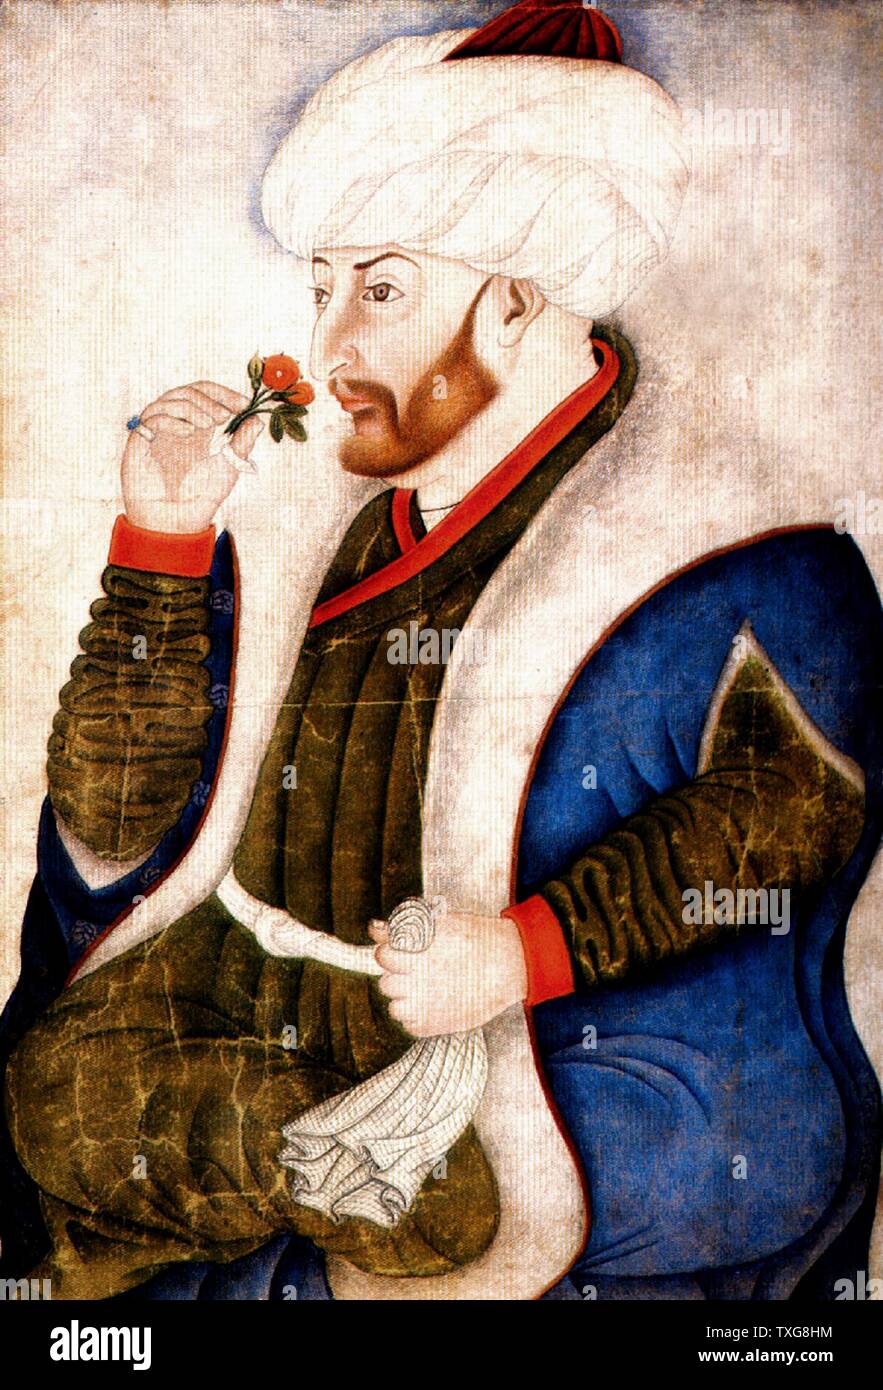 Sinian Bey Ottoman school Suleiman I, longest-reigning Sultan of the Ottoman Empire (1520-1566) Suleiman the magnificent Stock Photo